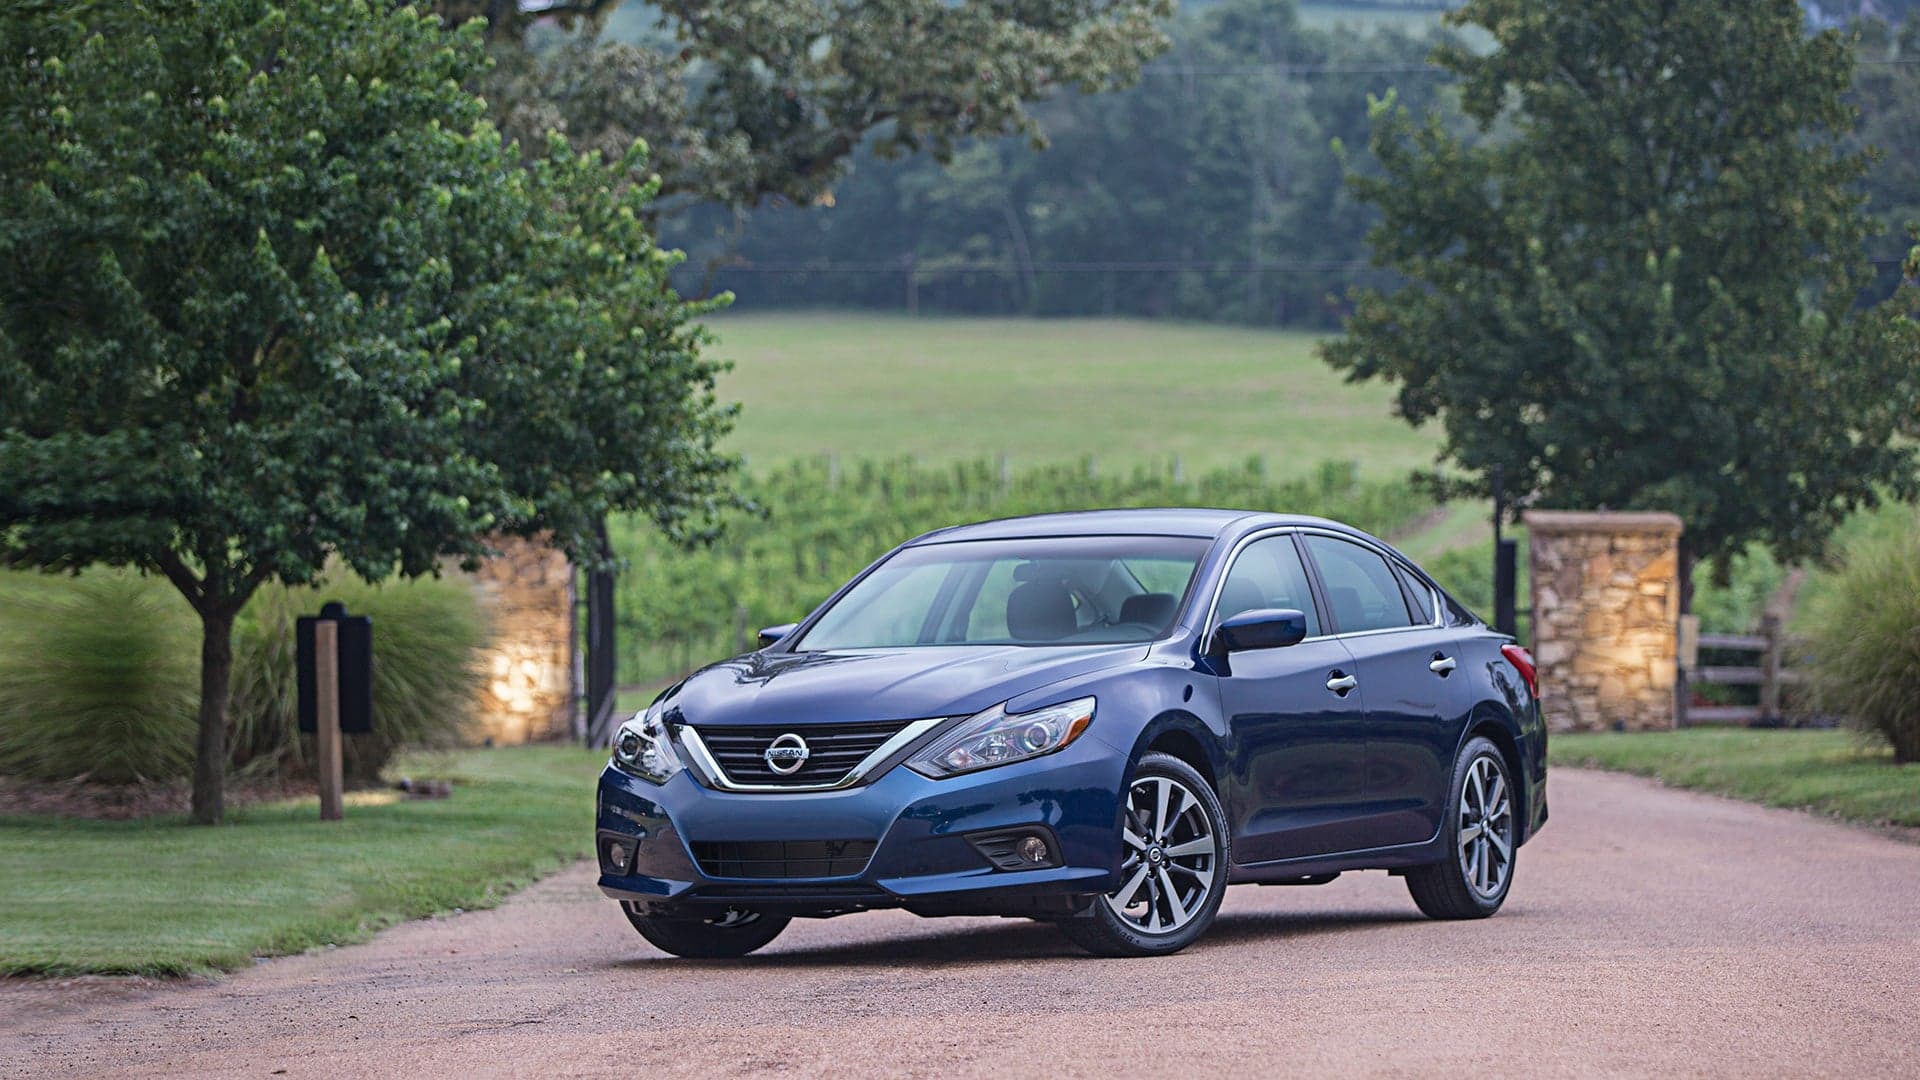 The Nissan Altima Will Make You Disappear